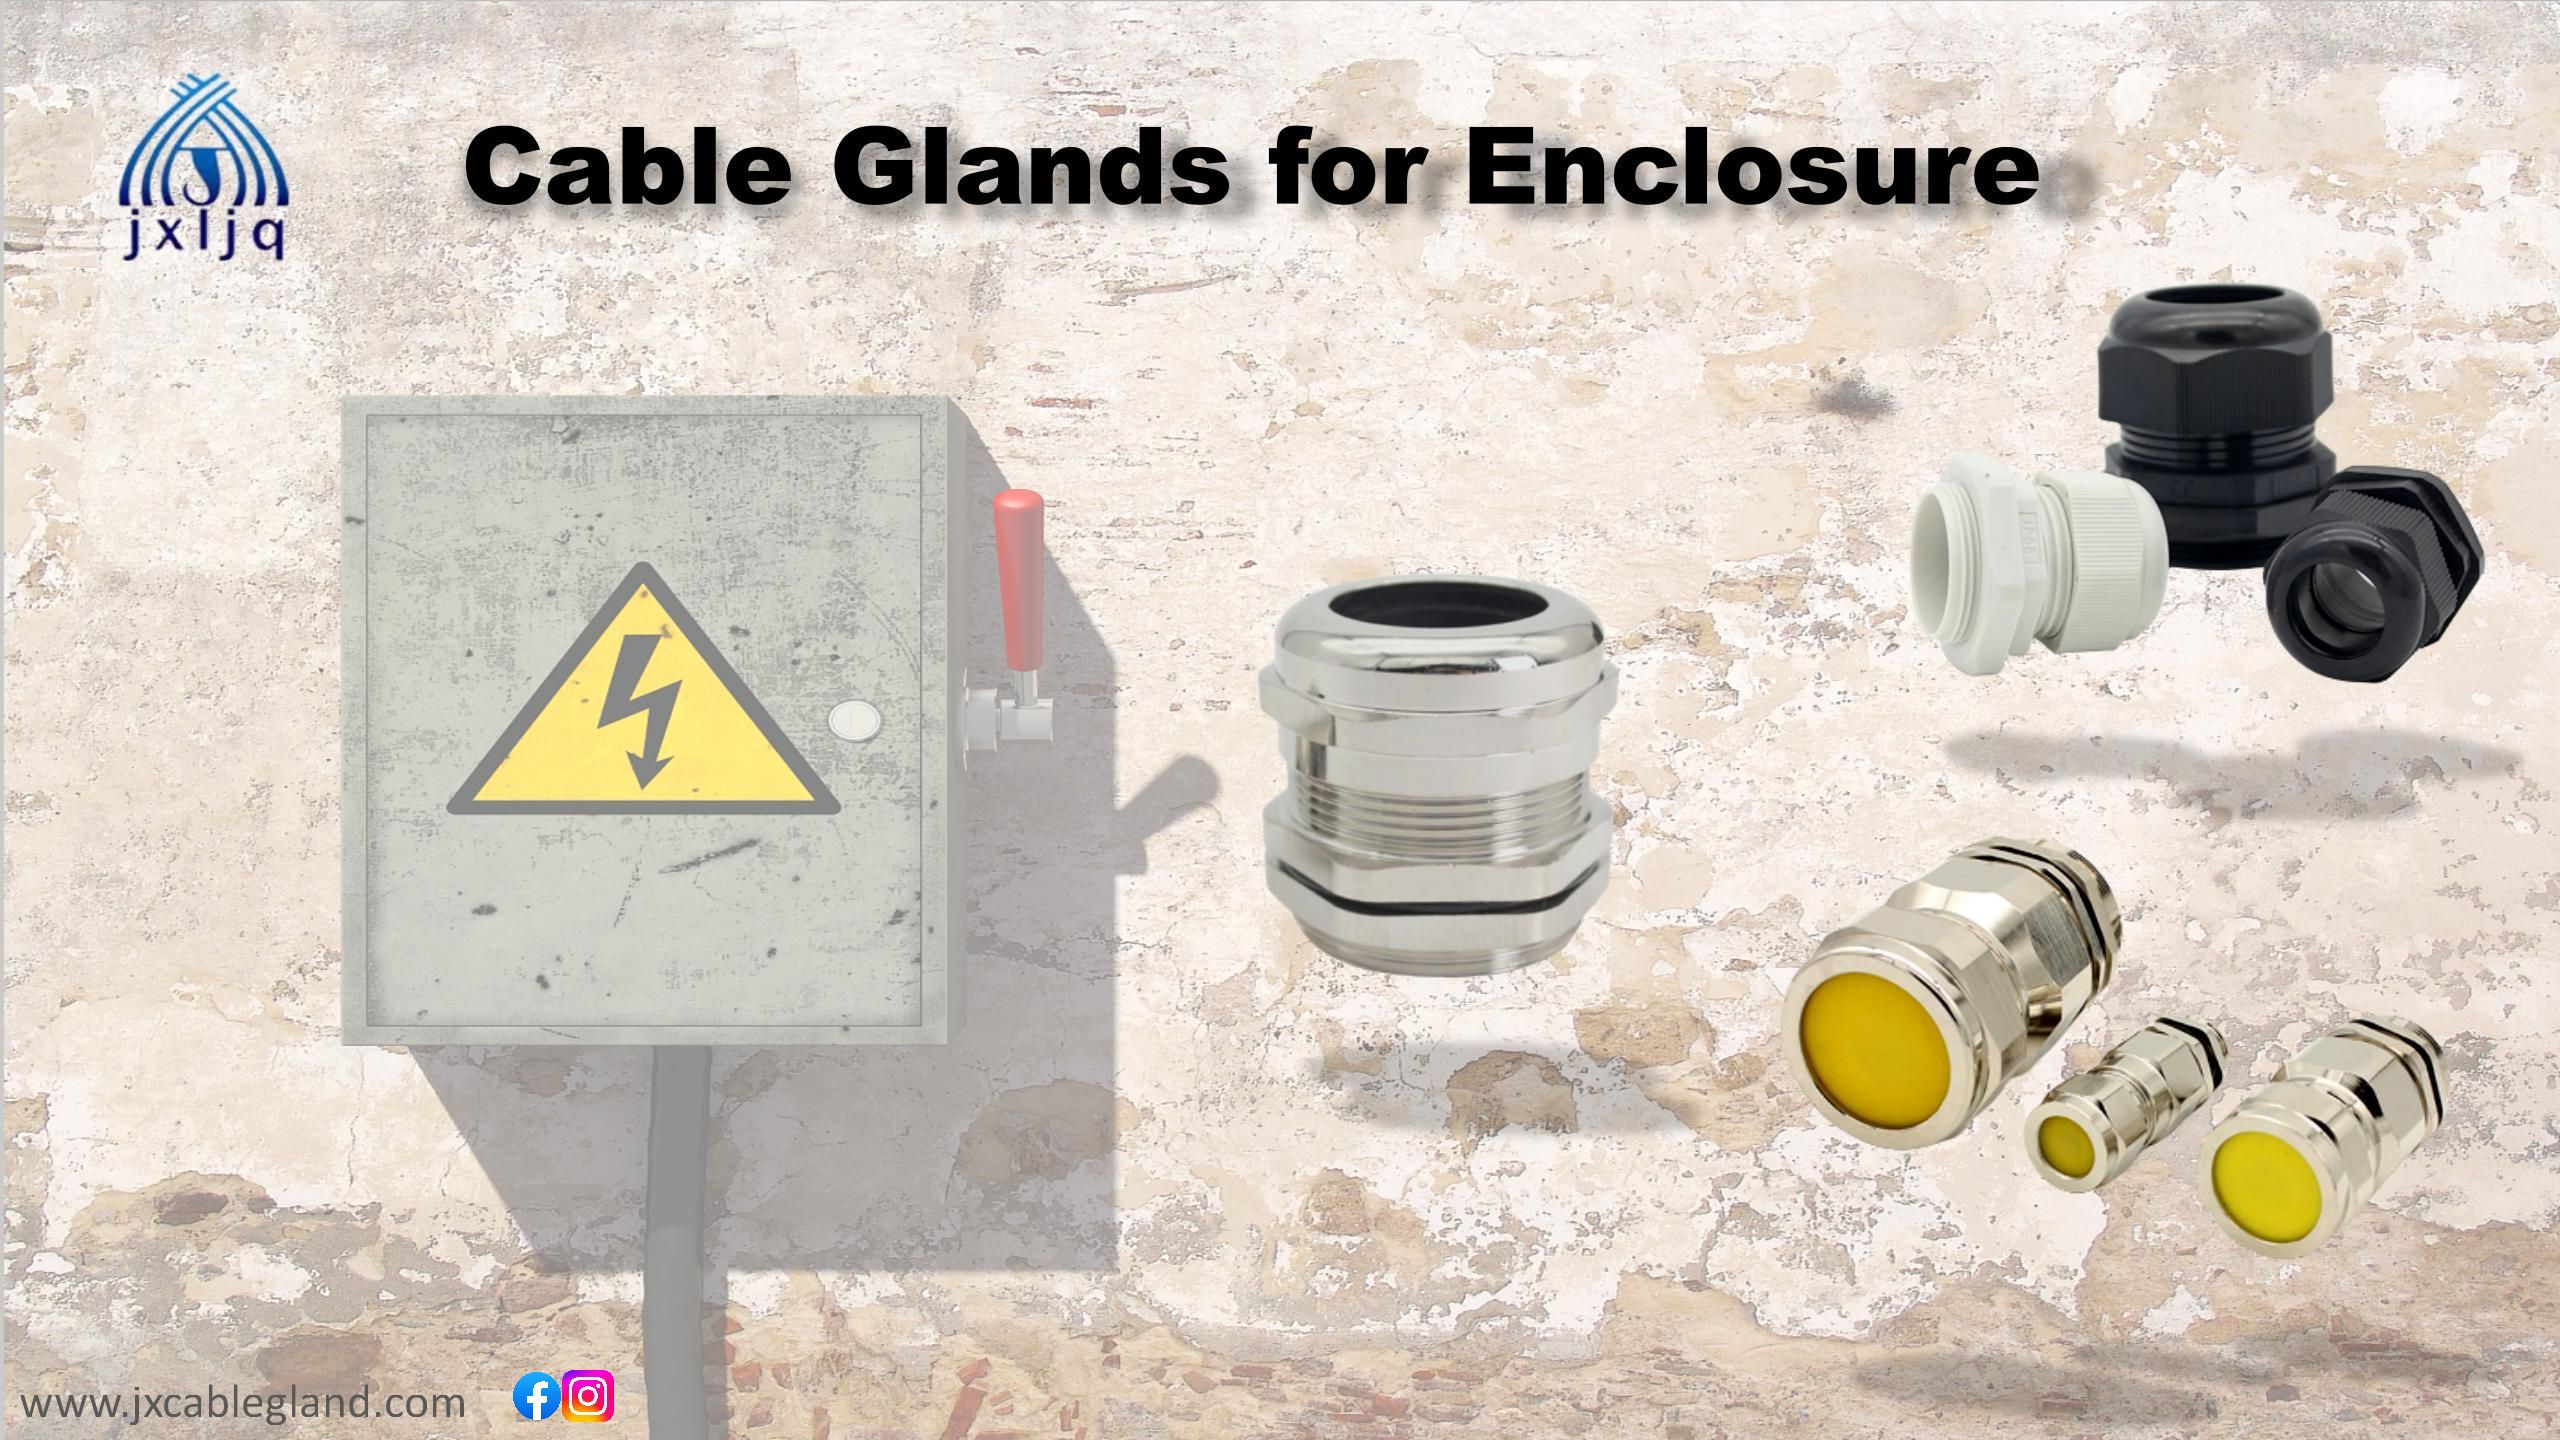 Cable Glands for Enclosure